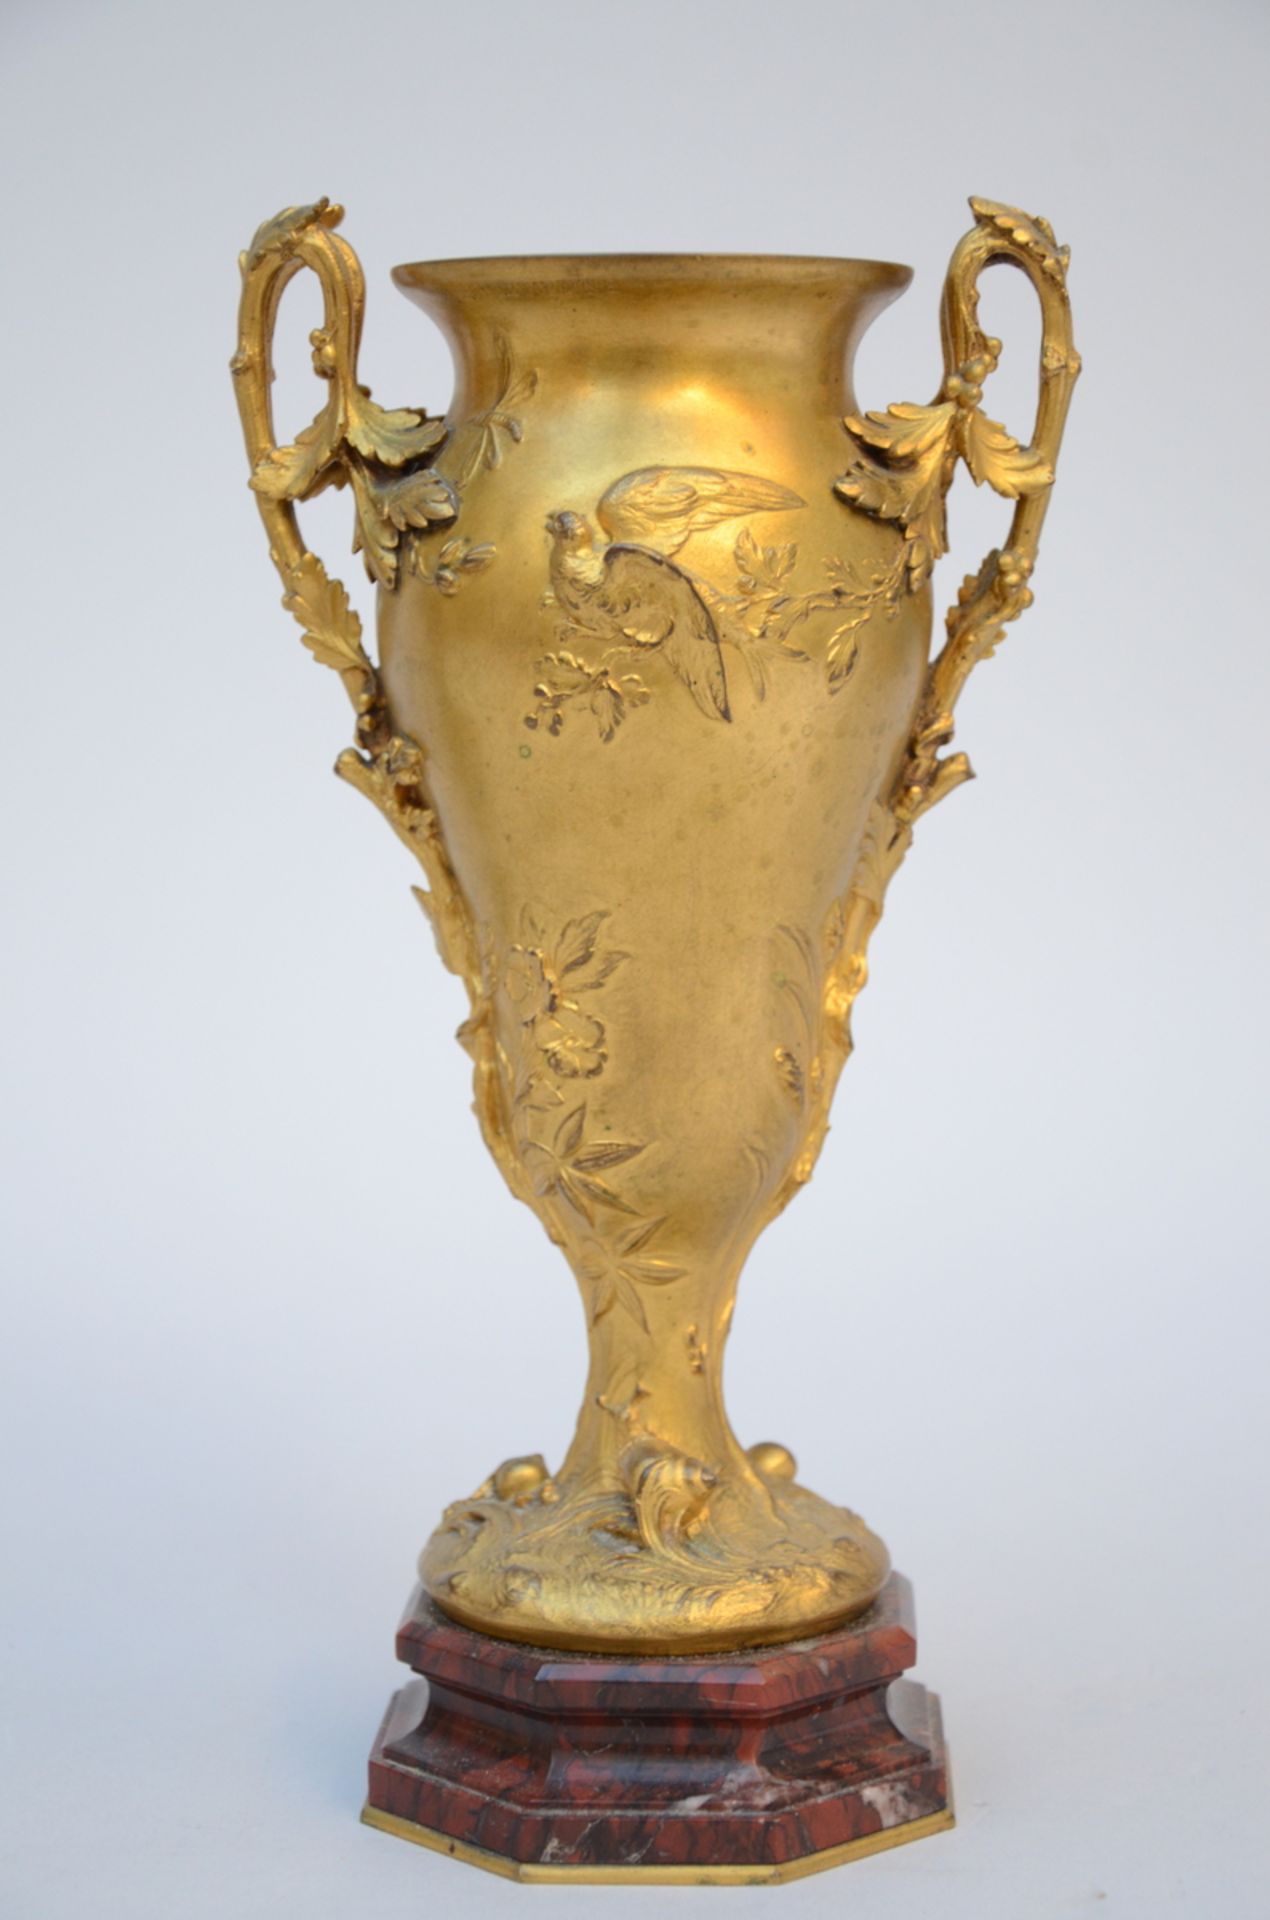 Lot: a gilt bronze lamp by Meliodon (52 x 41 cm) and an art nouveau vase in bronze by Barbedienne ( - Image 2 of 6